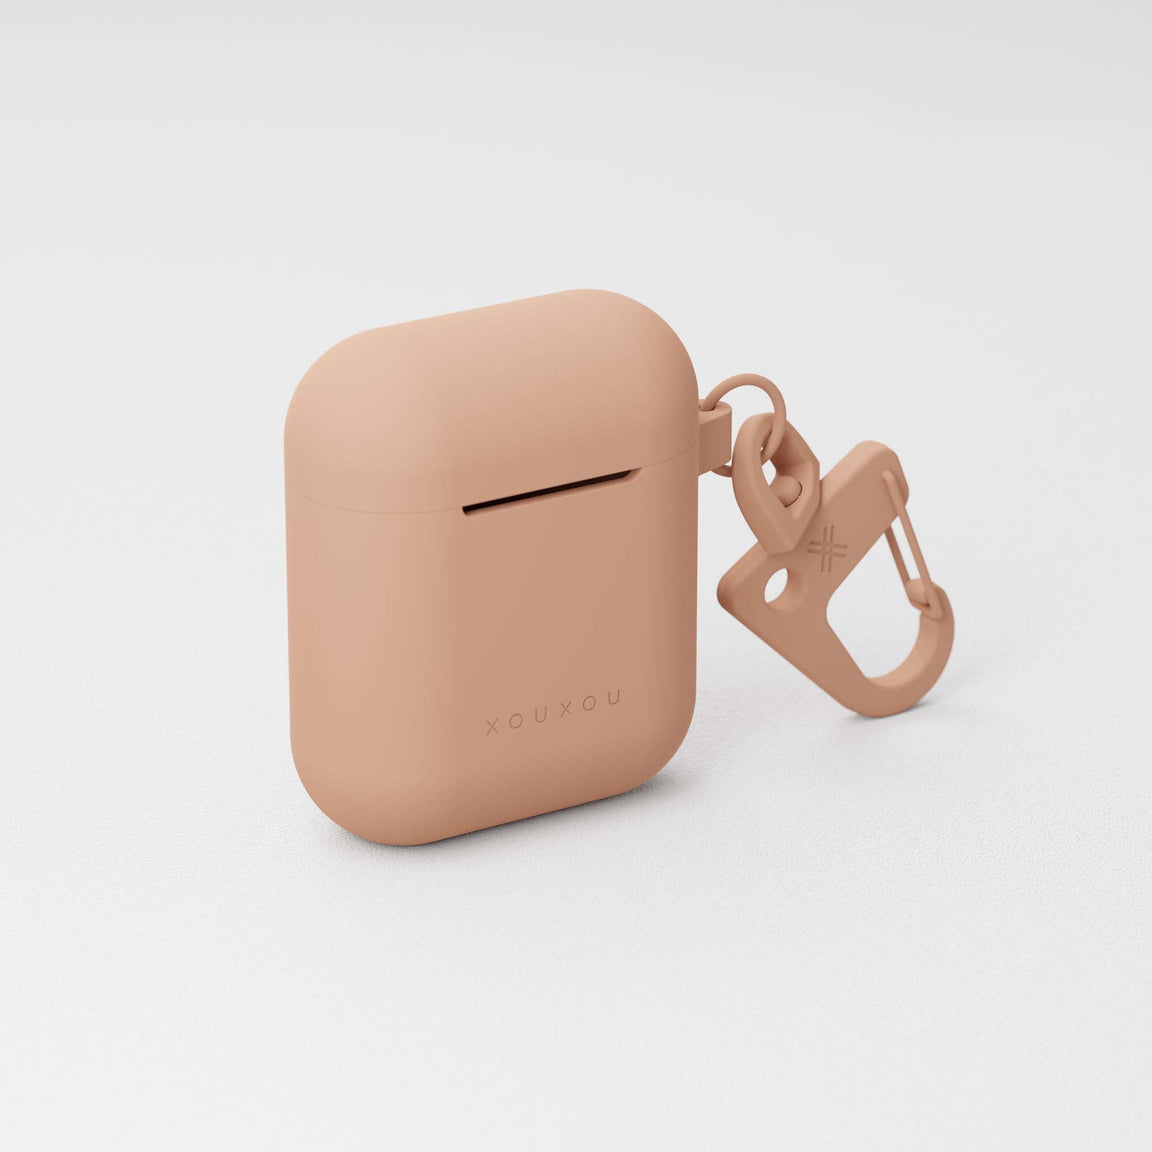 1st and 2nd generation Apple AirPods case in Powder Pink | XOUXOU